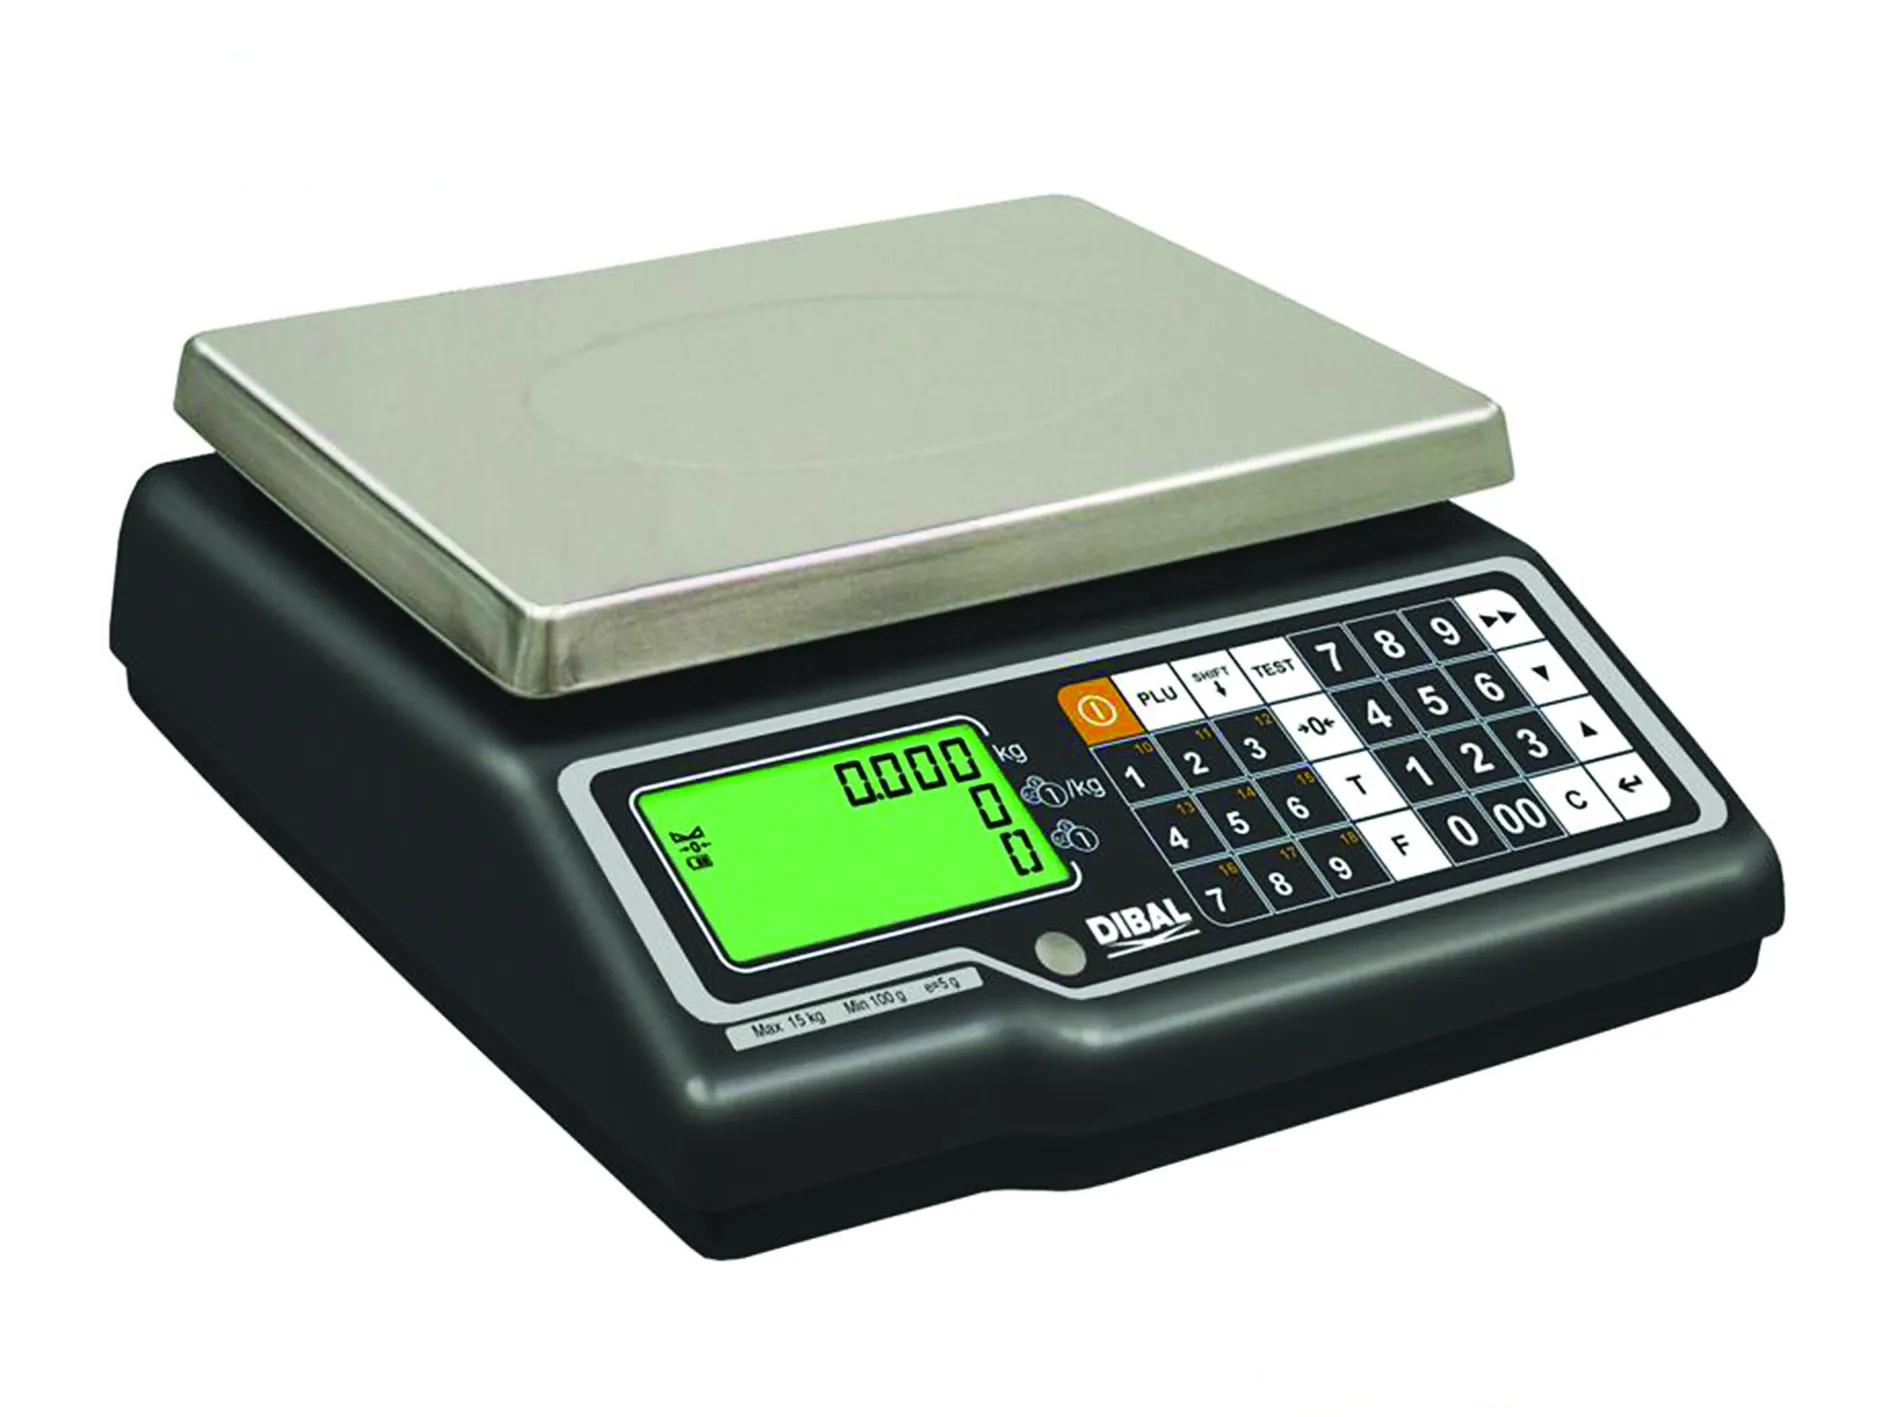 Dibal G-310 Weigh and Pay Scales